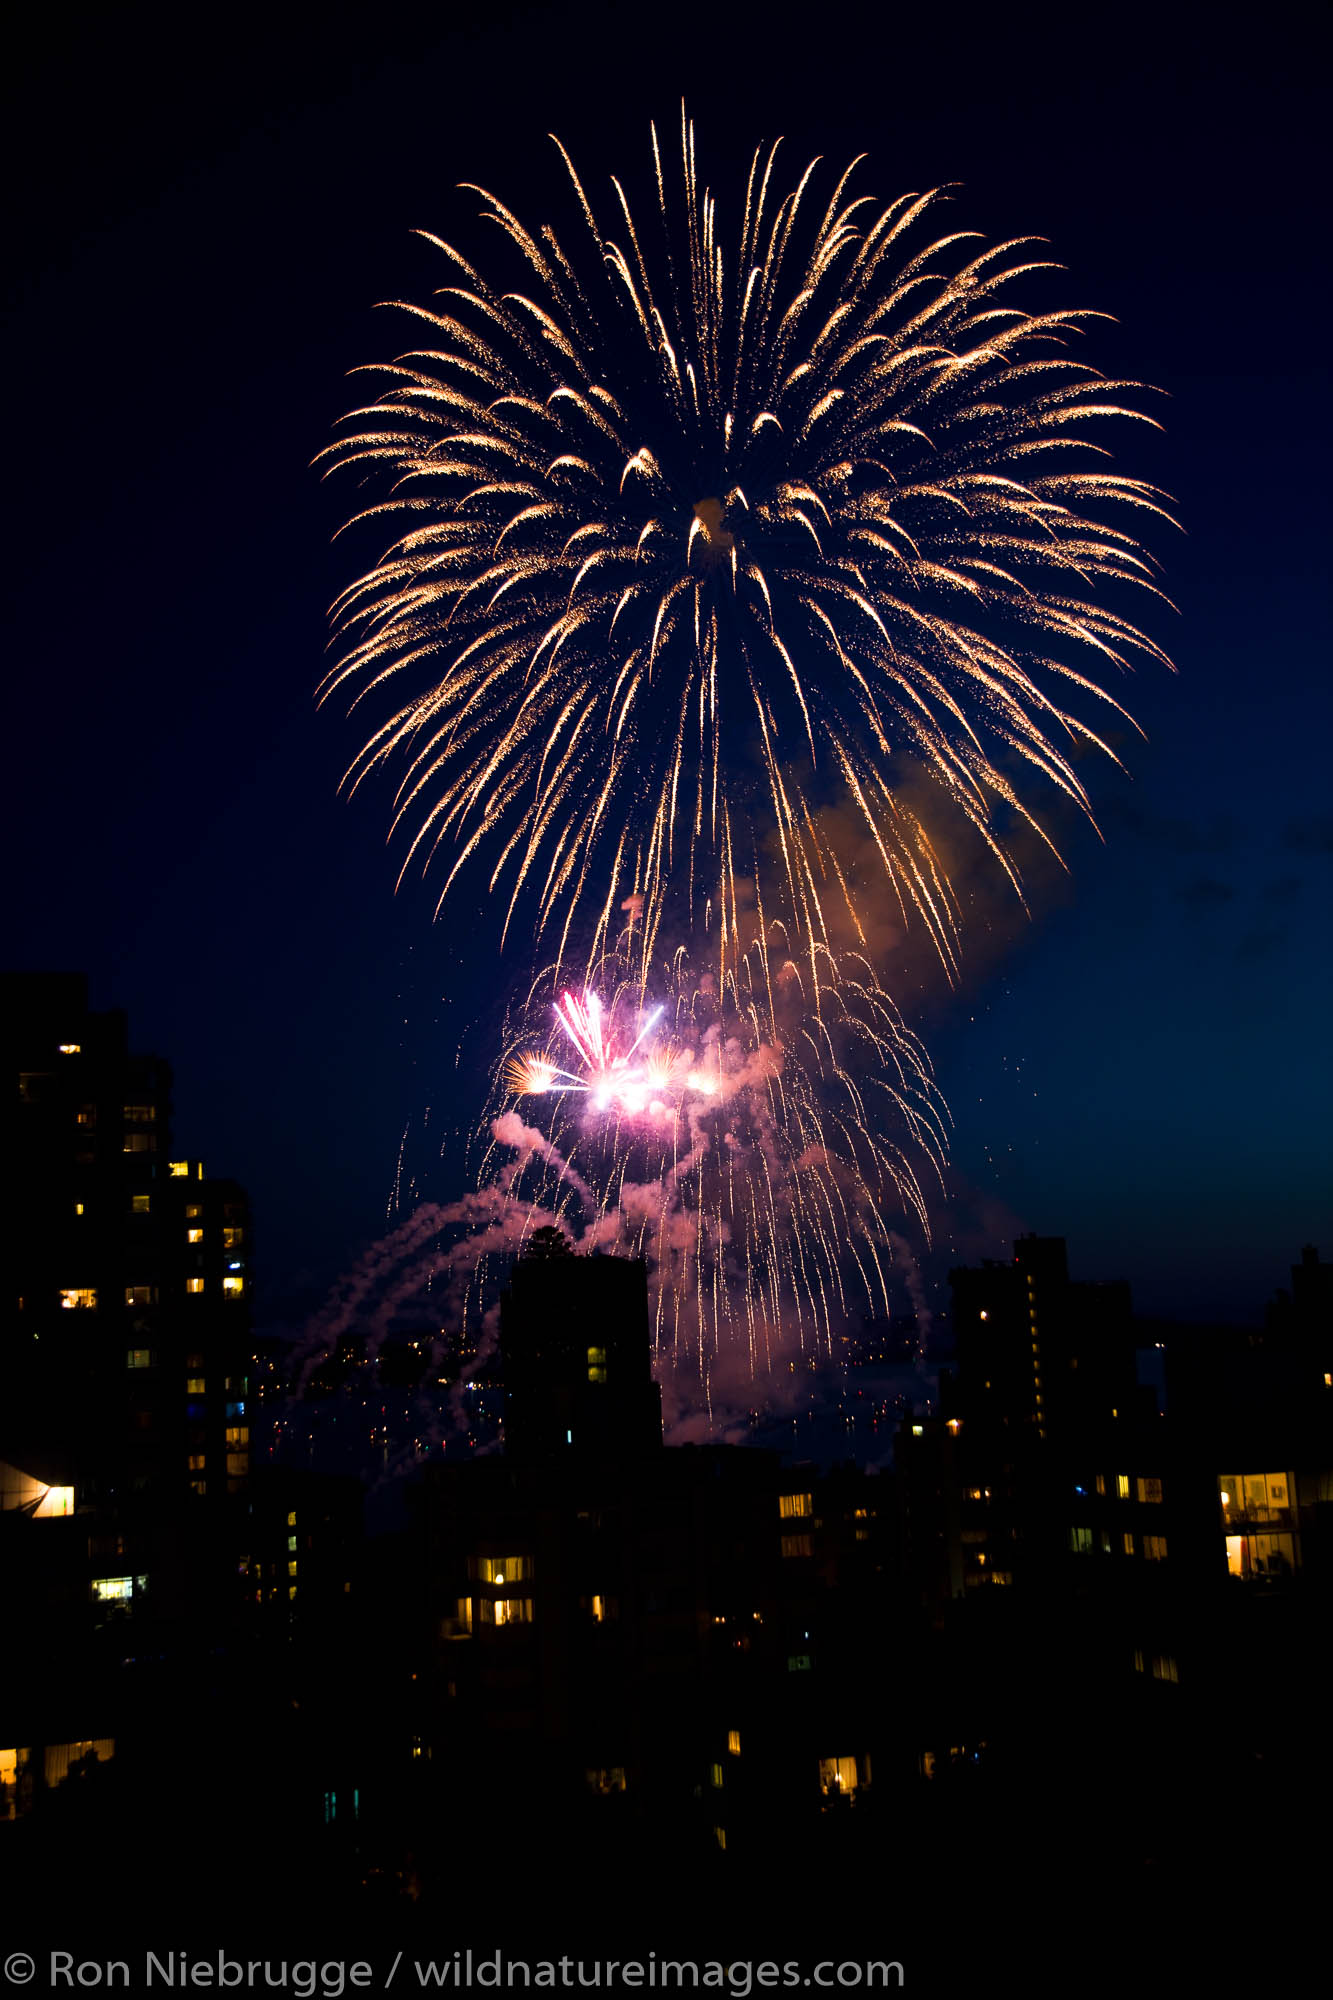 Fireworks during the Canadian portion of the 2009 Celebration of Light, Vancouver, British Columbia, Canada.